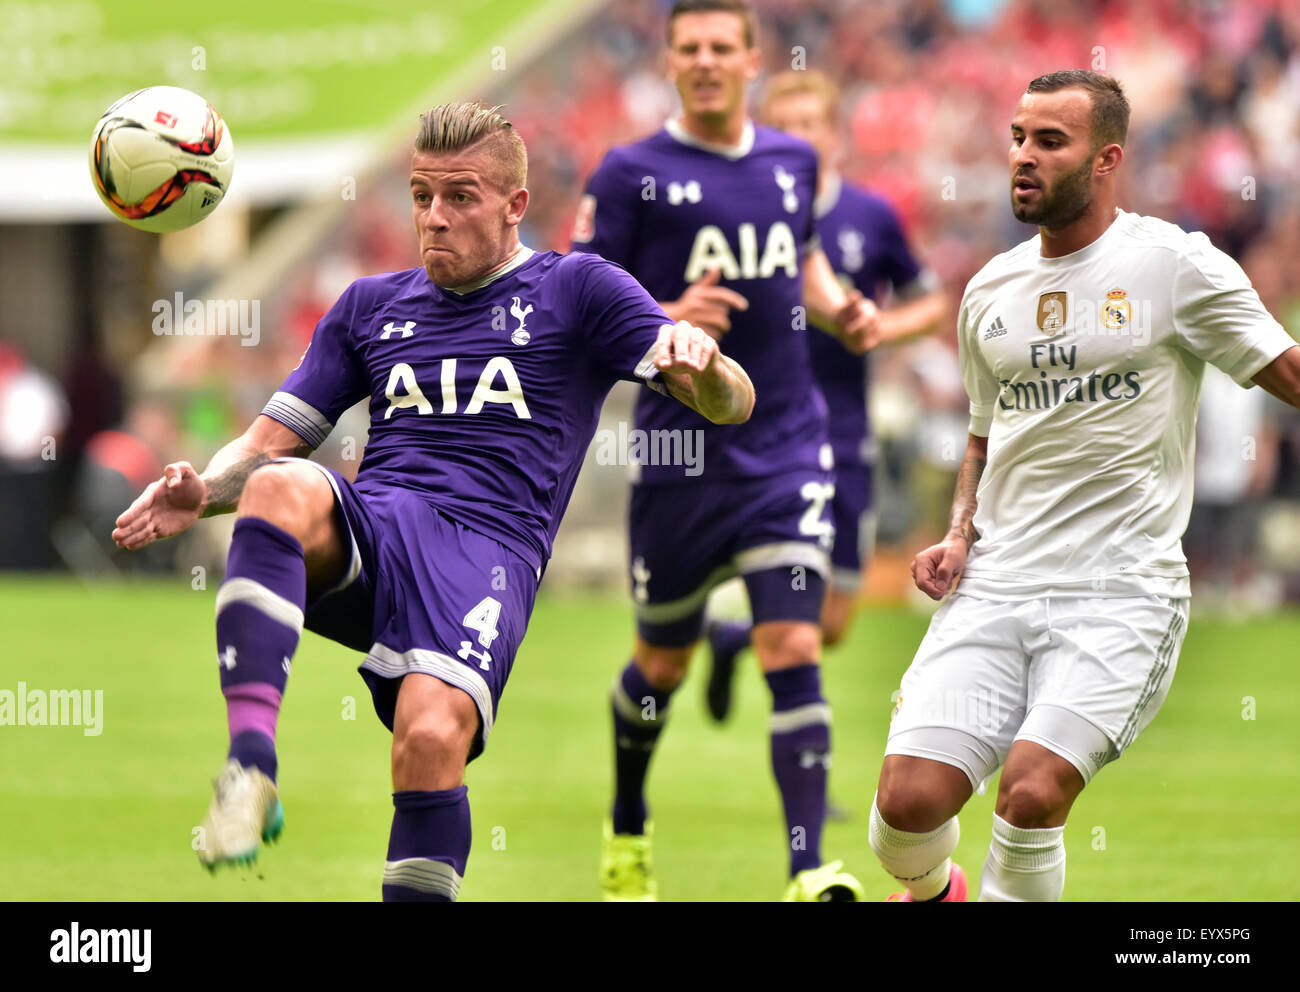 Munich, Germany. 4th Aug, 2015. Real Madrid's Jese (r) and Tottenham's Toby Alderweireld compete for the ball during the Audi Cup soccer friendly between Real Madrid and Tottenham Hotspur in Munich, Germany, 4 August 2015. PHOTO: PETER KNEFFEL/DPA/Alamy Live News Stock Photo